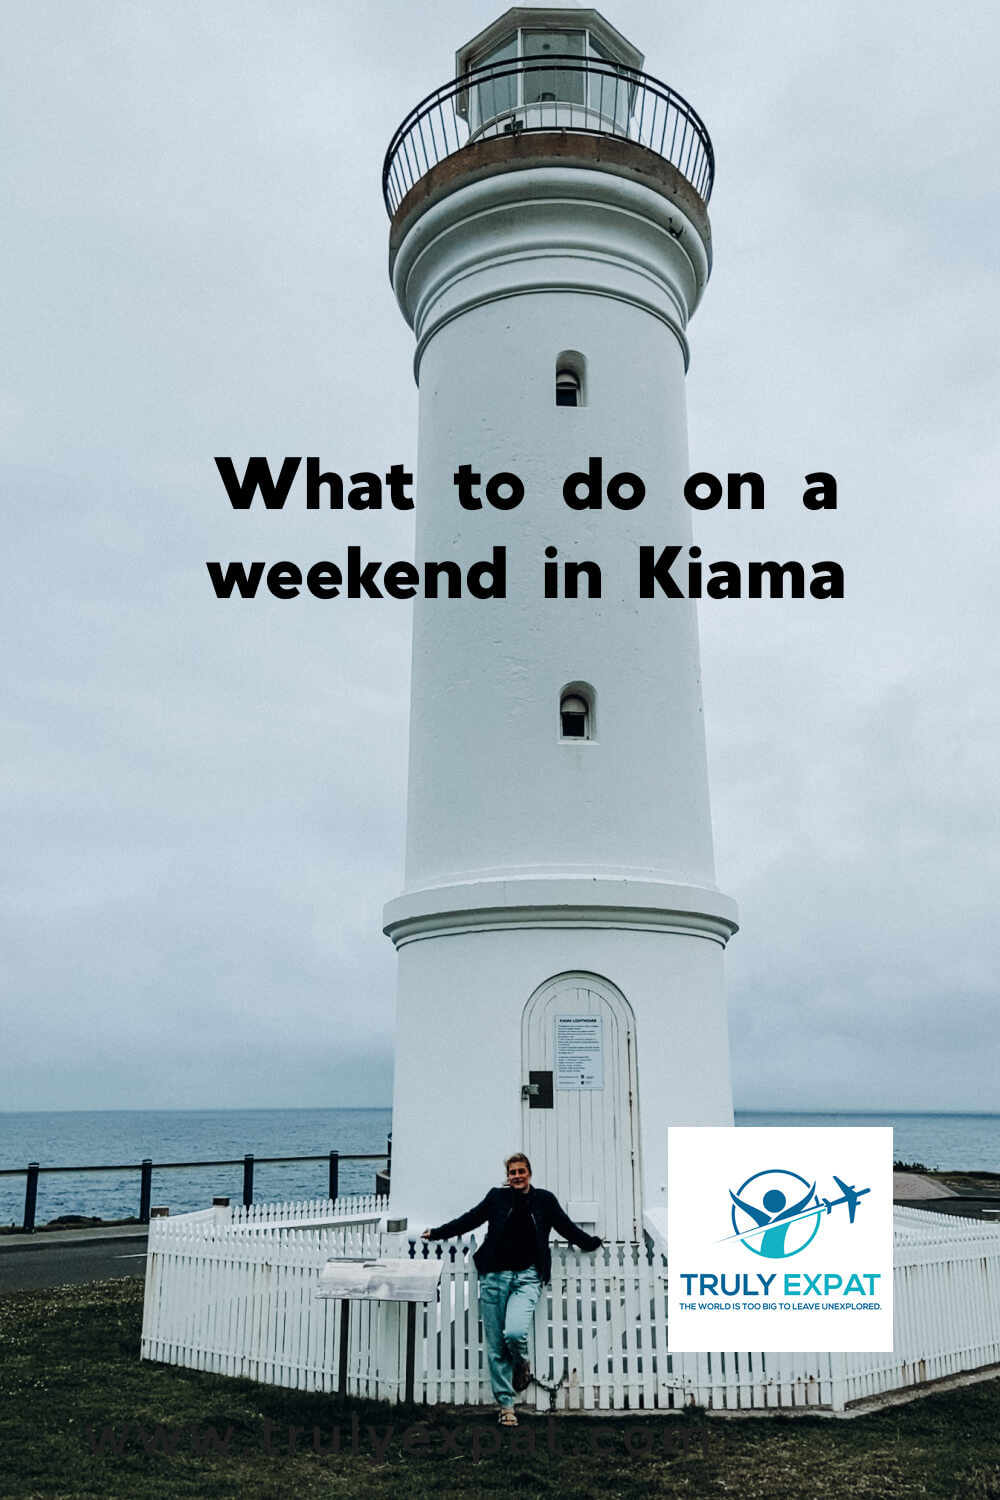 What to do on a weekend in Kiama